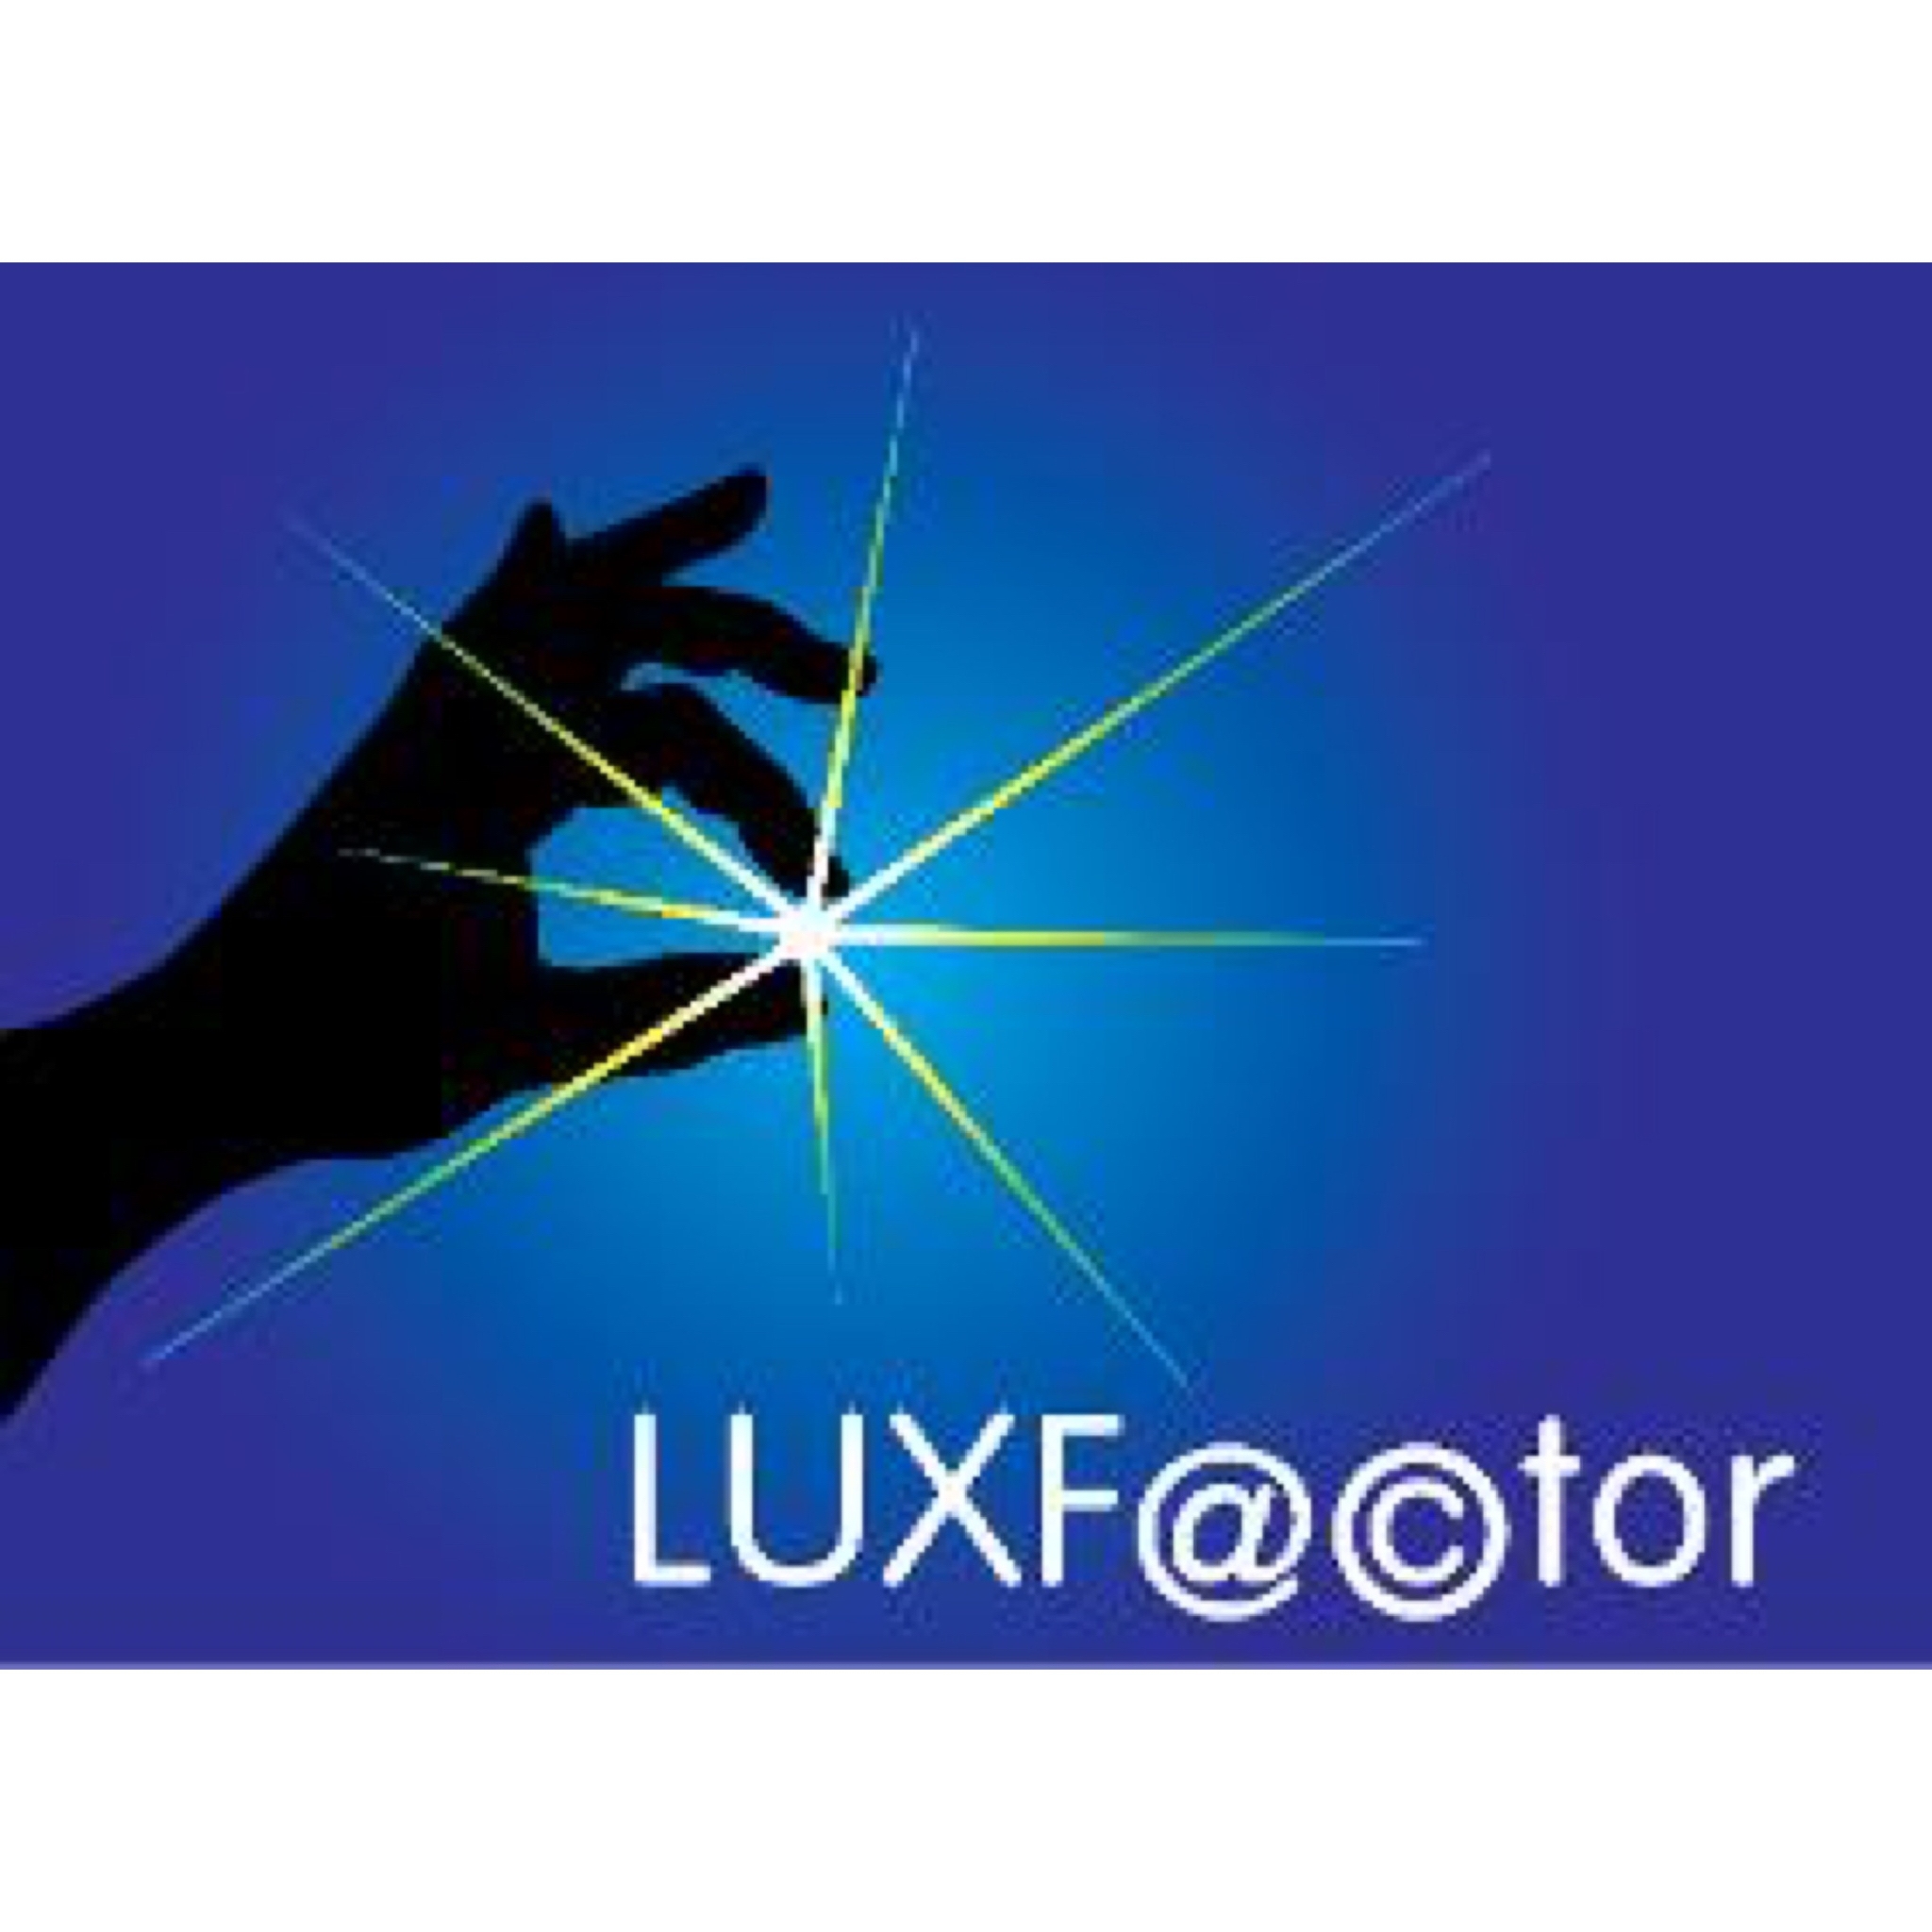 (c) Luxfactor.co.uk